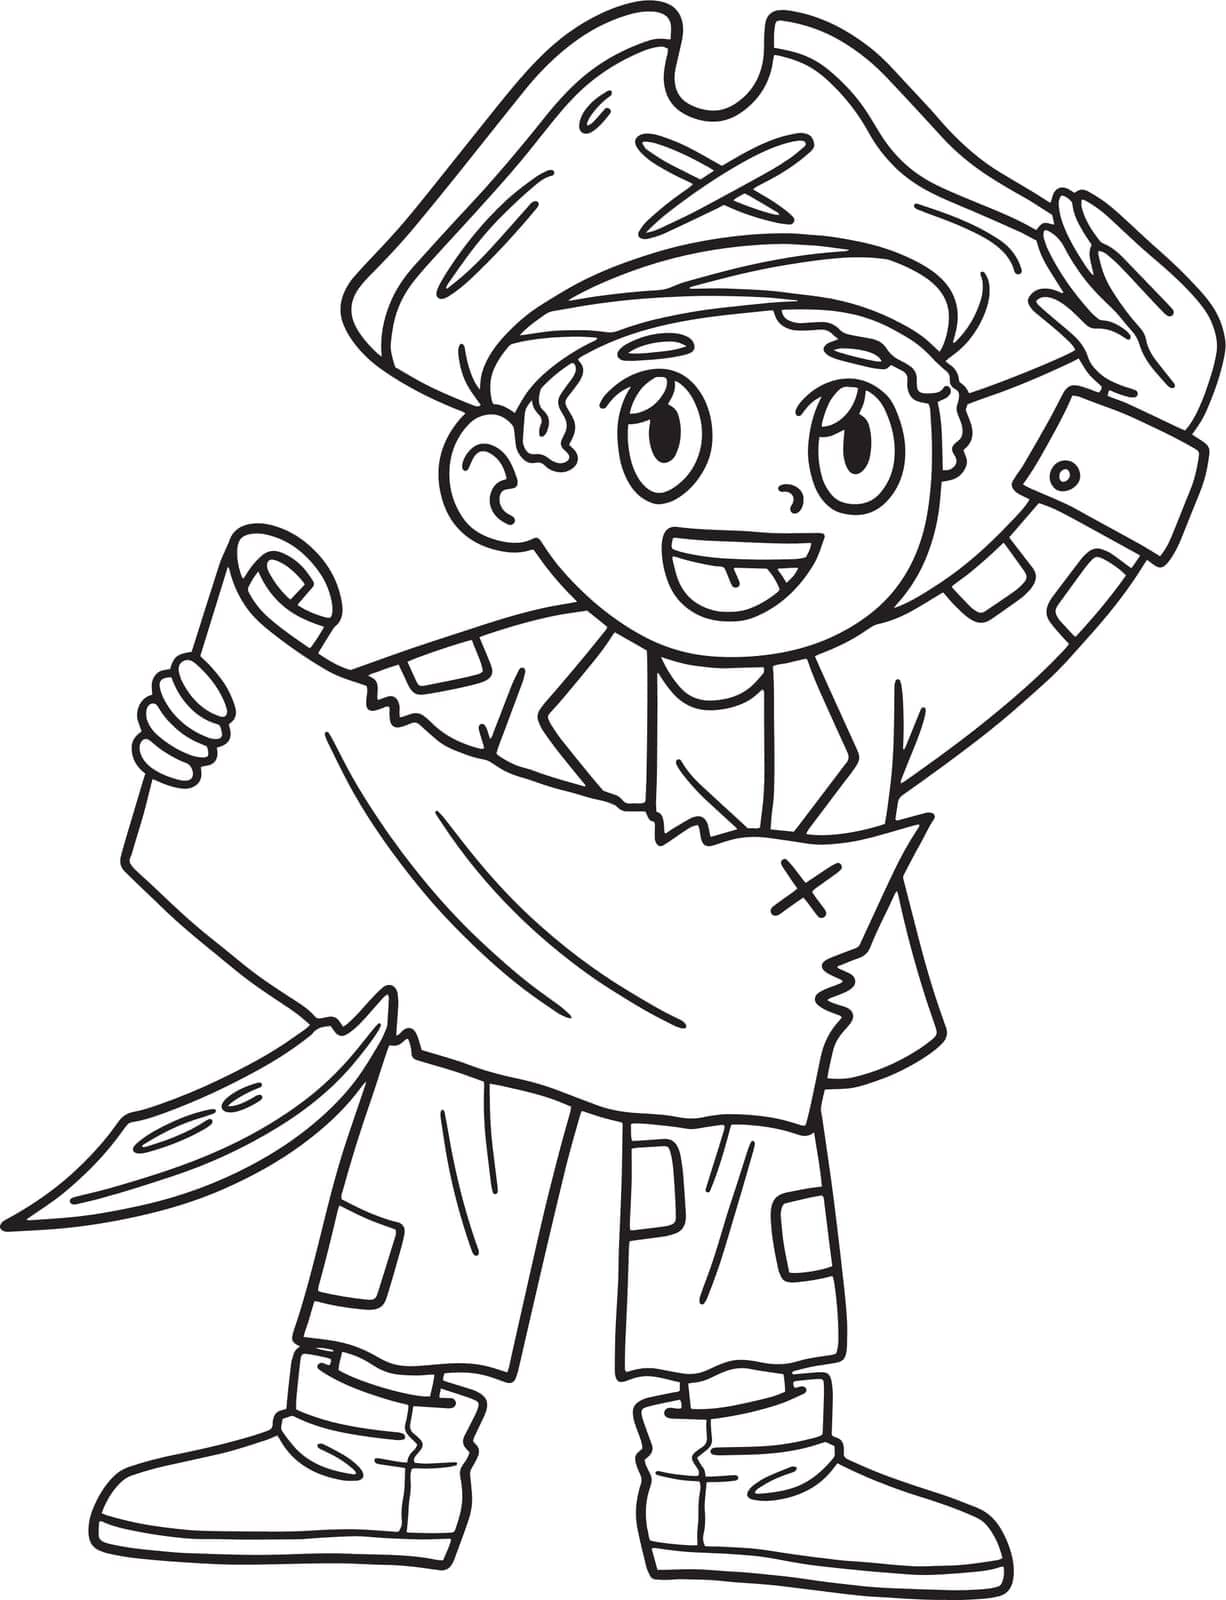 A cute and funny coloring page of a Pirate with a Treasure Map. Provides hours of coloring fun for children. Color, this page is very easy. Suitable for little kids and toddlers.